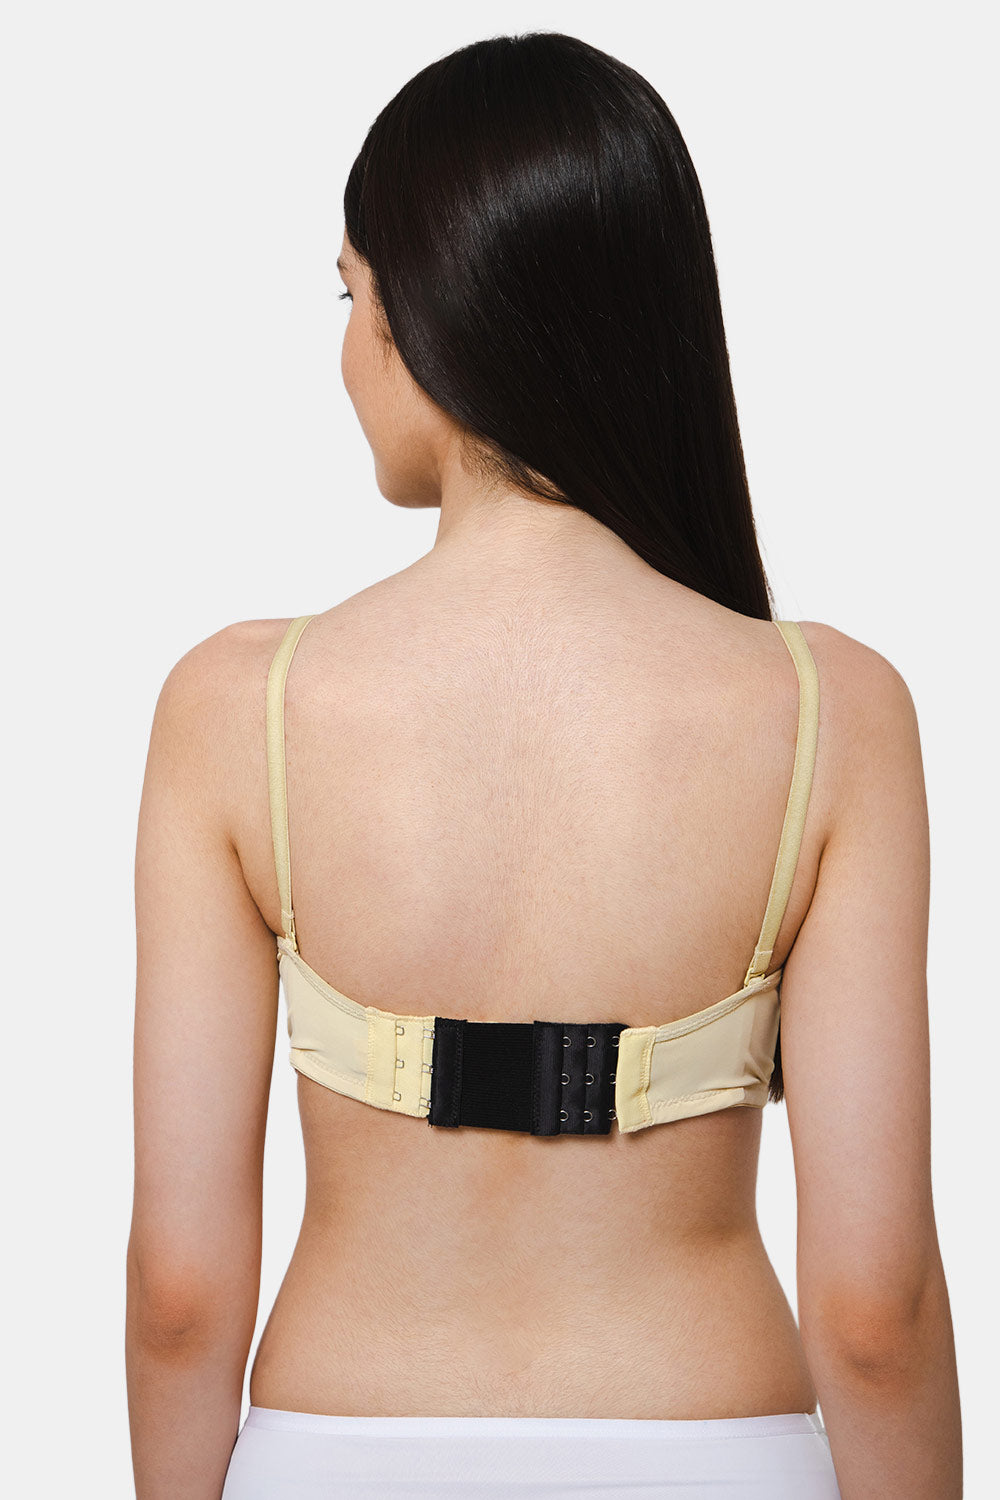 Maxbell 5 Pieces Bra Extenders 2 Hooks 2 Rows Elastic Bra Strap Extension  Set Accessories for Women at Rs 519.99, New Delhi